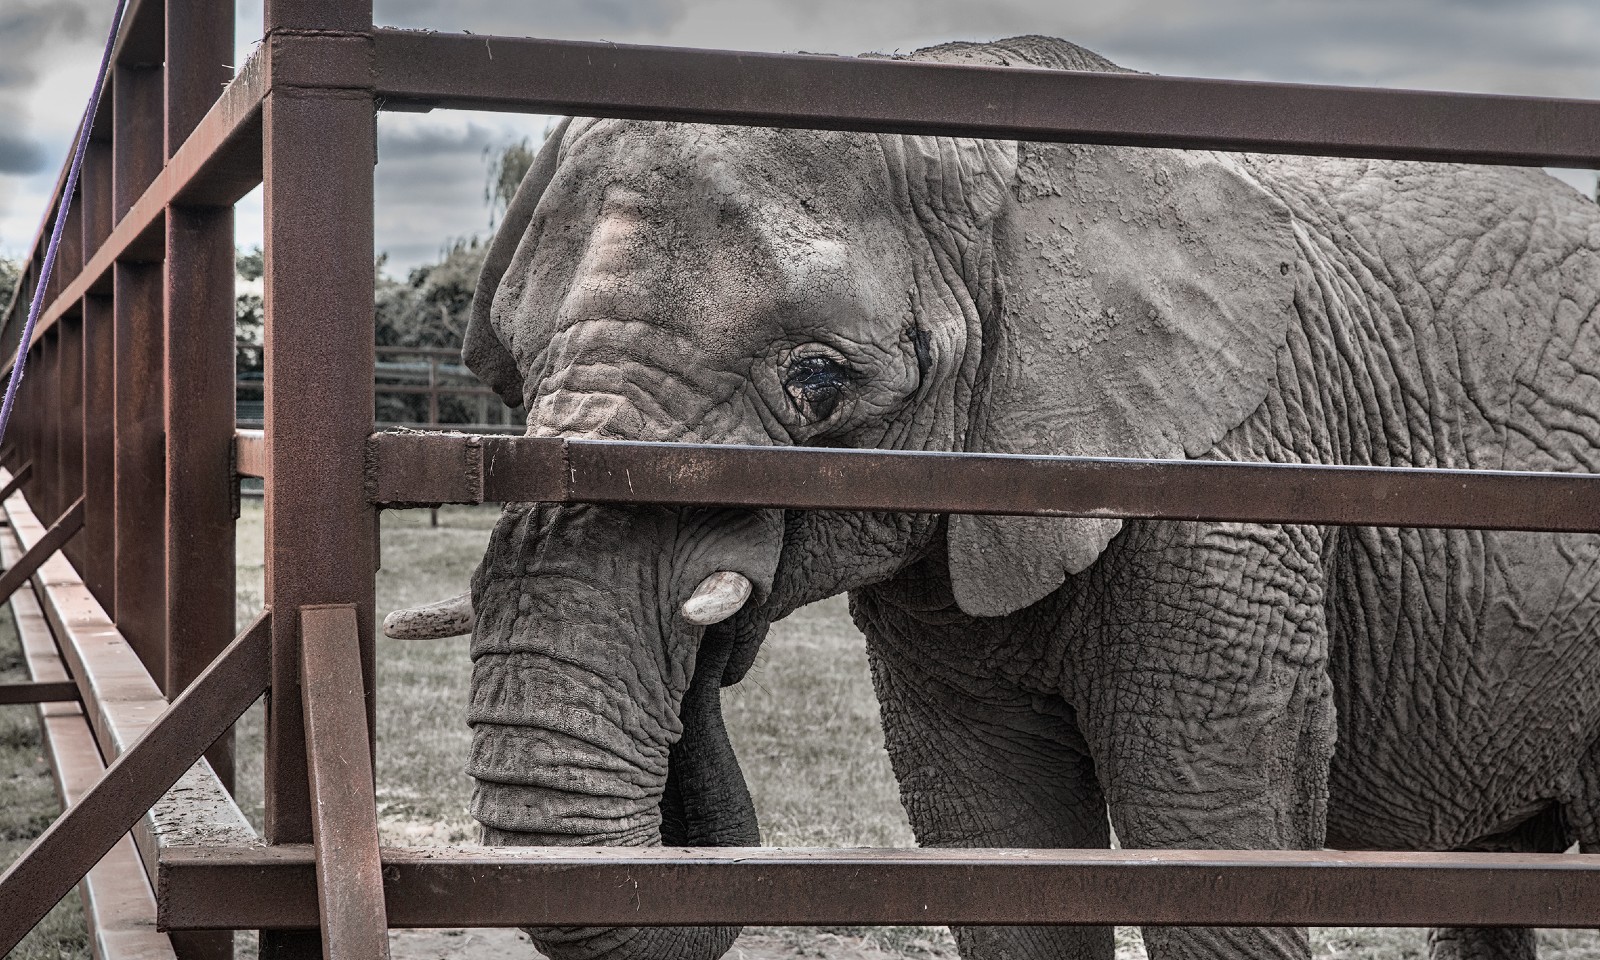 A solitary elephant standing by the bars of an enclosure